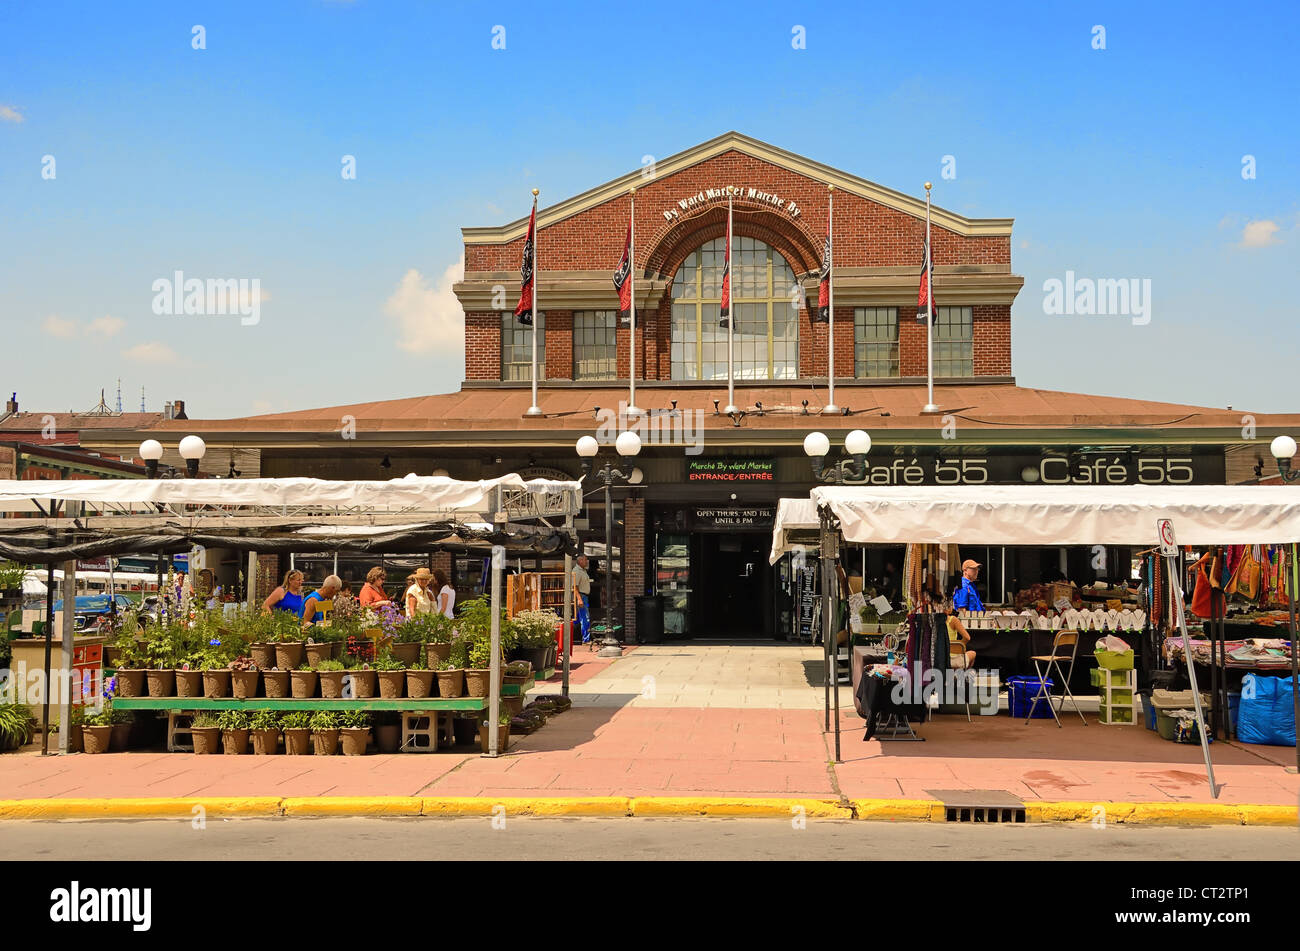 The main building of the Byward Market in Ottawa, Ontario, Canada Stock Photo